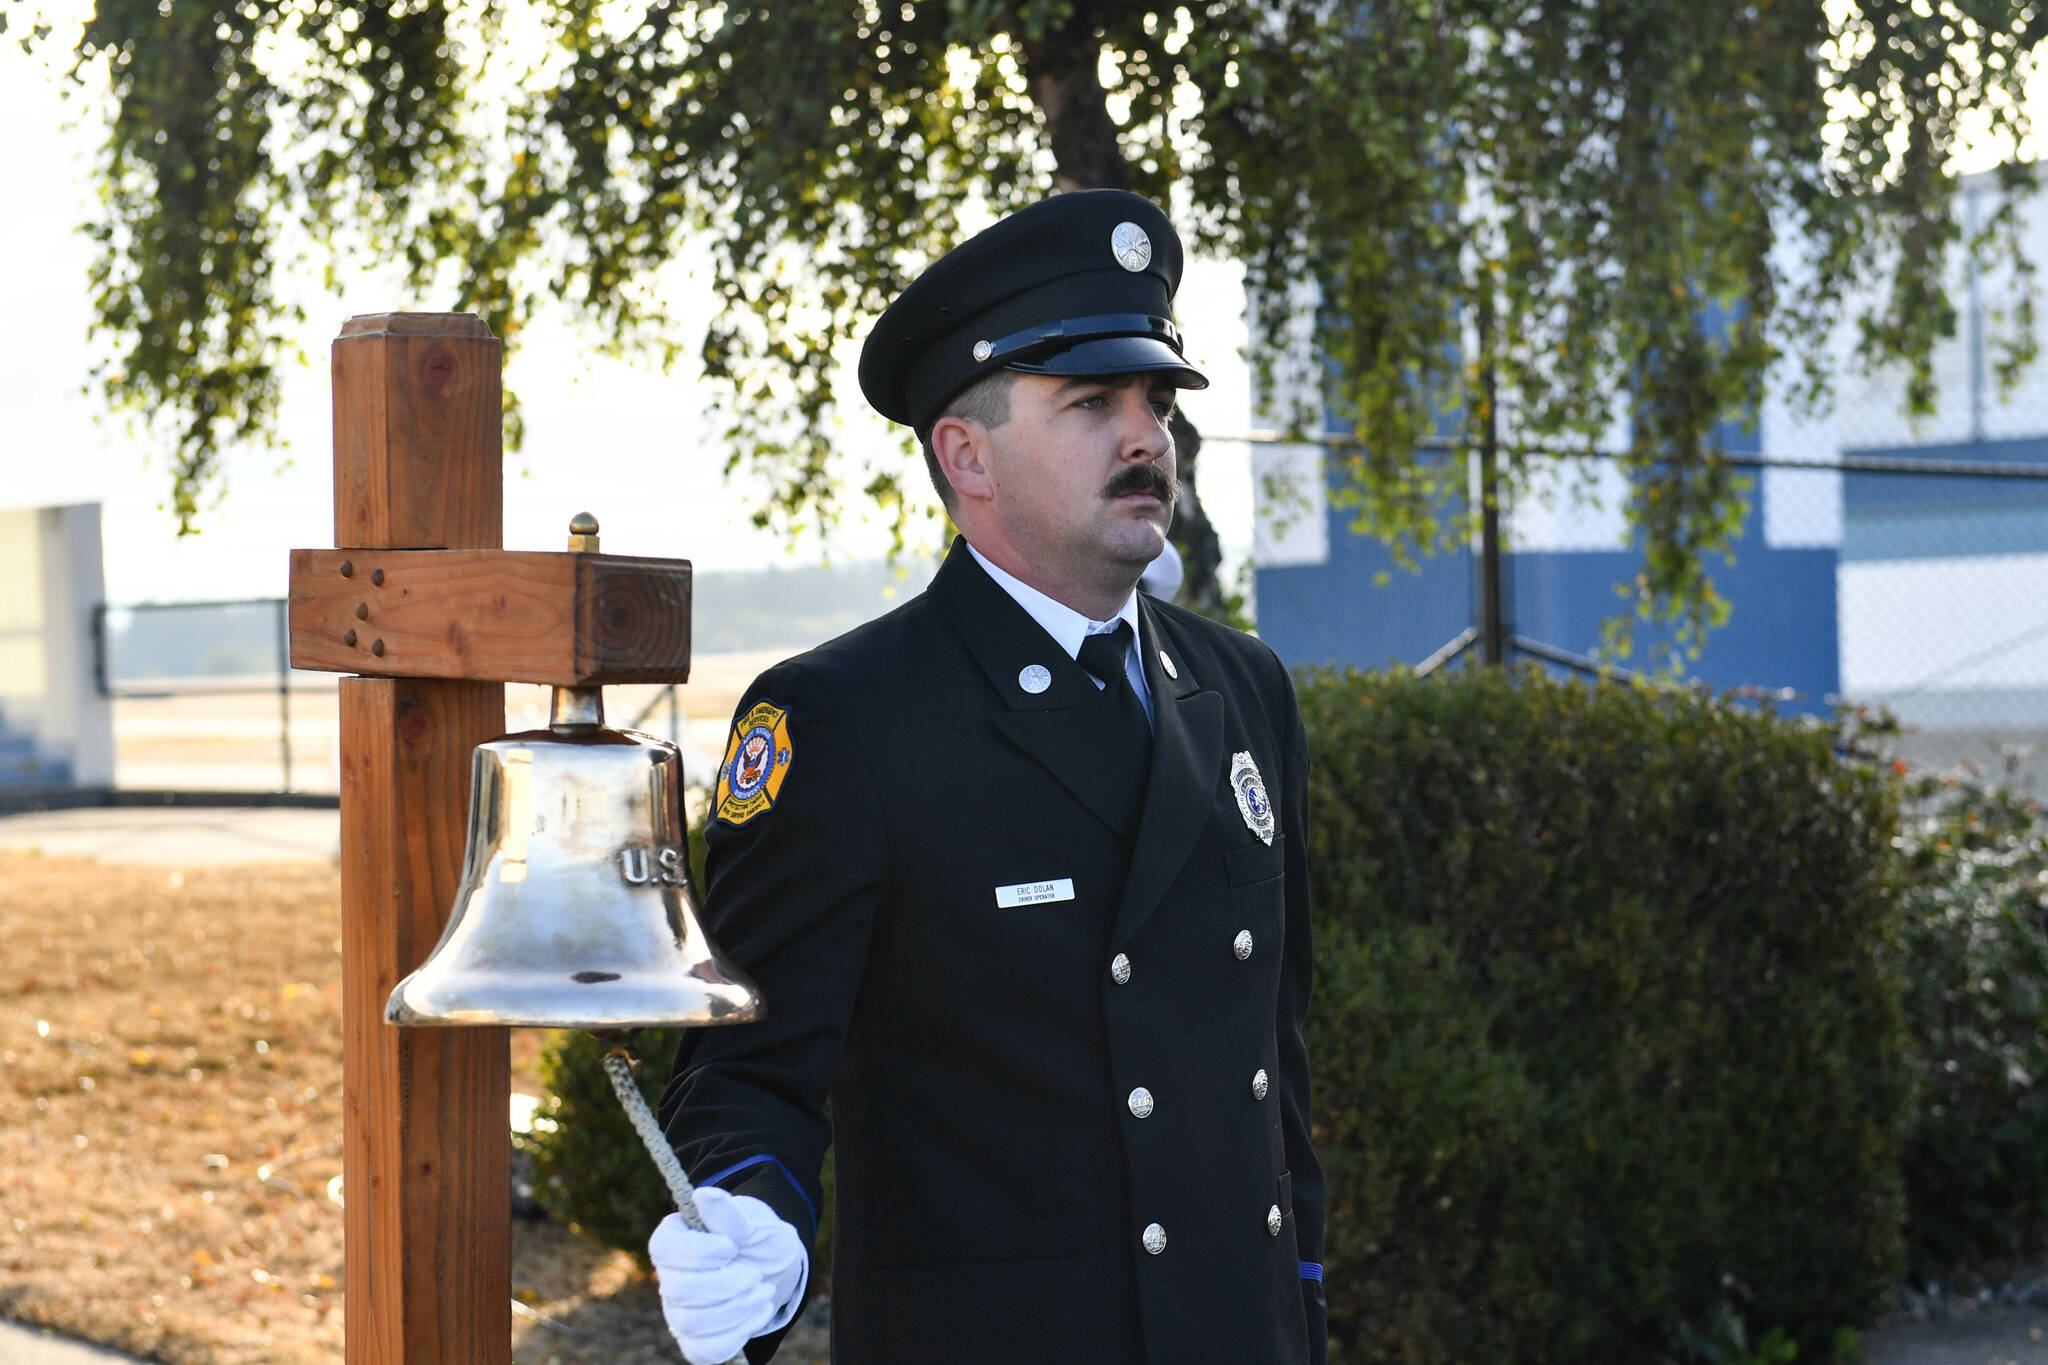 Navy photo by Mass Communications Specialist Second Class (MC2) Aranza Valdez
Eric Dolan, a driver/operator with Navy Region Northwest Fire and Emergency Services, rings a bell Friday, Sept. 10, during NAS Whidbey Island’s ceremony to remember the 9/11 terrorist attacks 20 years ago.